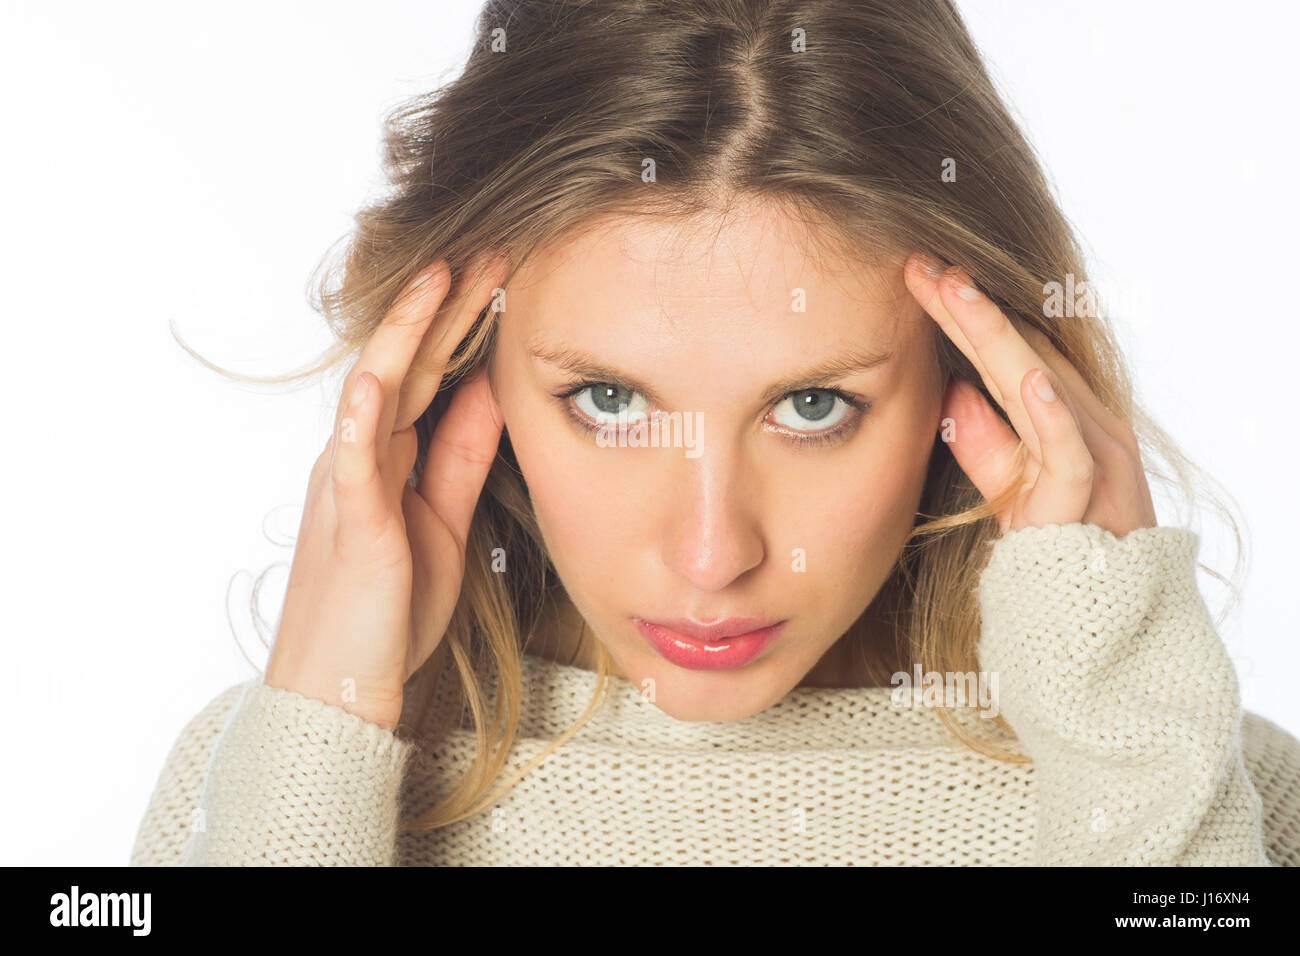 Serious young blond woman hnads on head staring against a white background Stock Photo